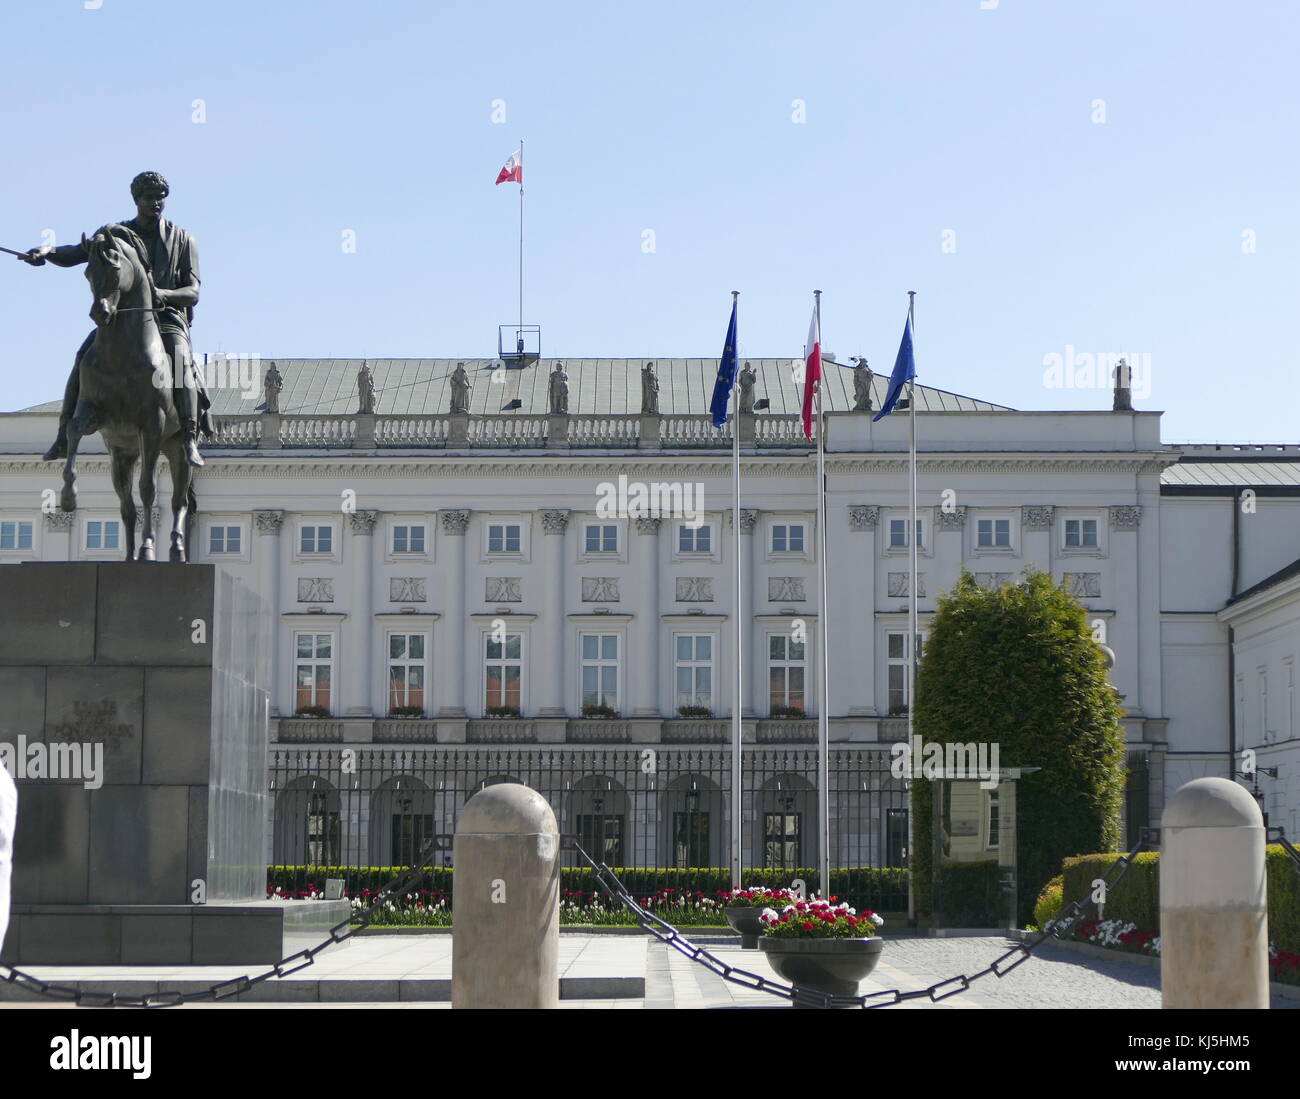 The Presidential Palace (Pa?ac Prezydencki) in Warsaw, Poland, is the elegant classicist latest version of a building that has stood on the Krakowskie Przedmie?cie site since 1643. Over the years, it has been rebuilt and remodelled many times. Stock Photo